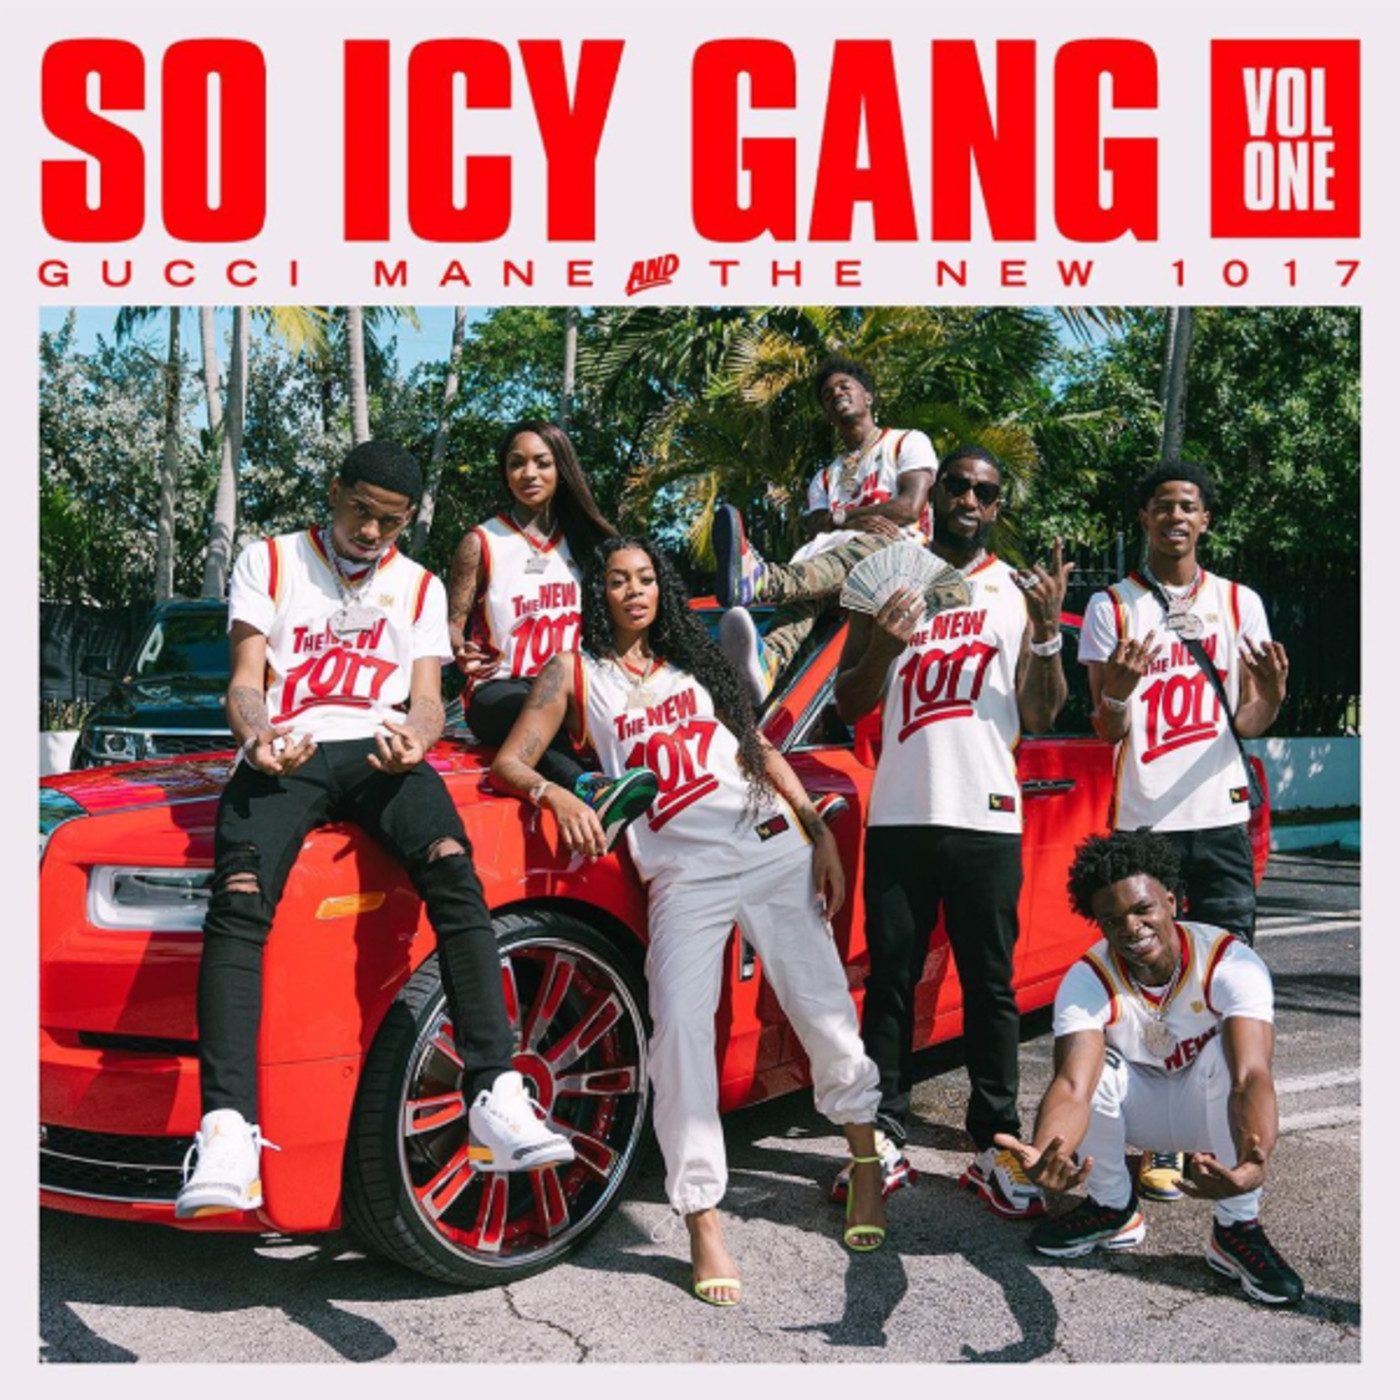 Gucci Mane Celebrates New 1017 Label With 'So Icy Gang Vol. 1